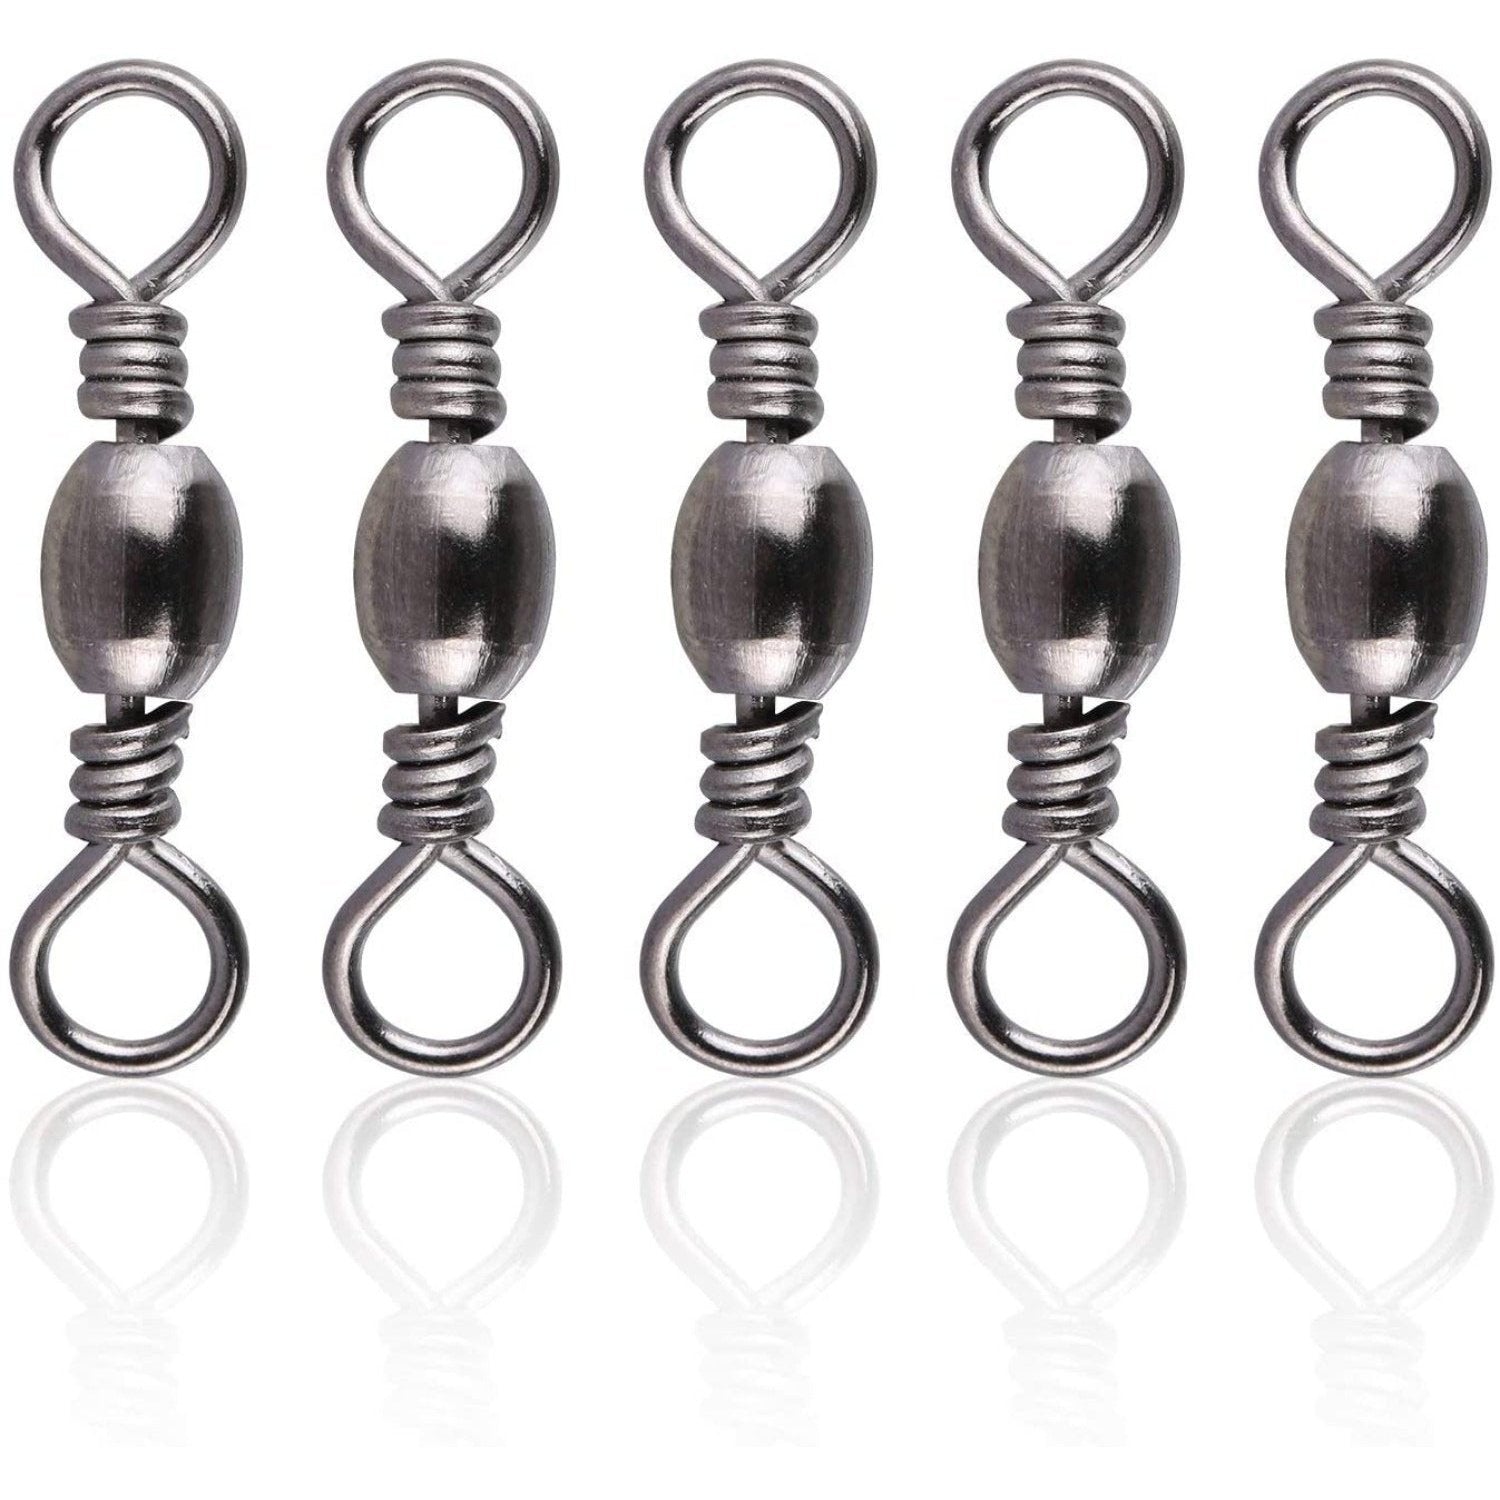 50pcs/lot Bearing Swivel Fishing Hook Fast Connector Solid Rings